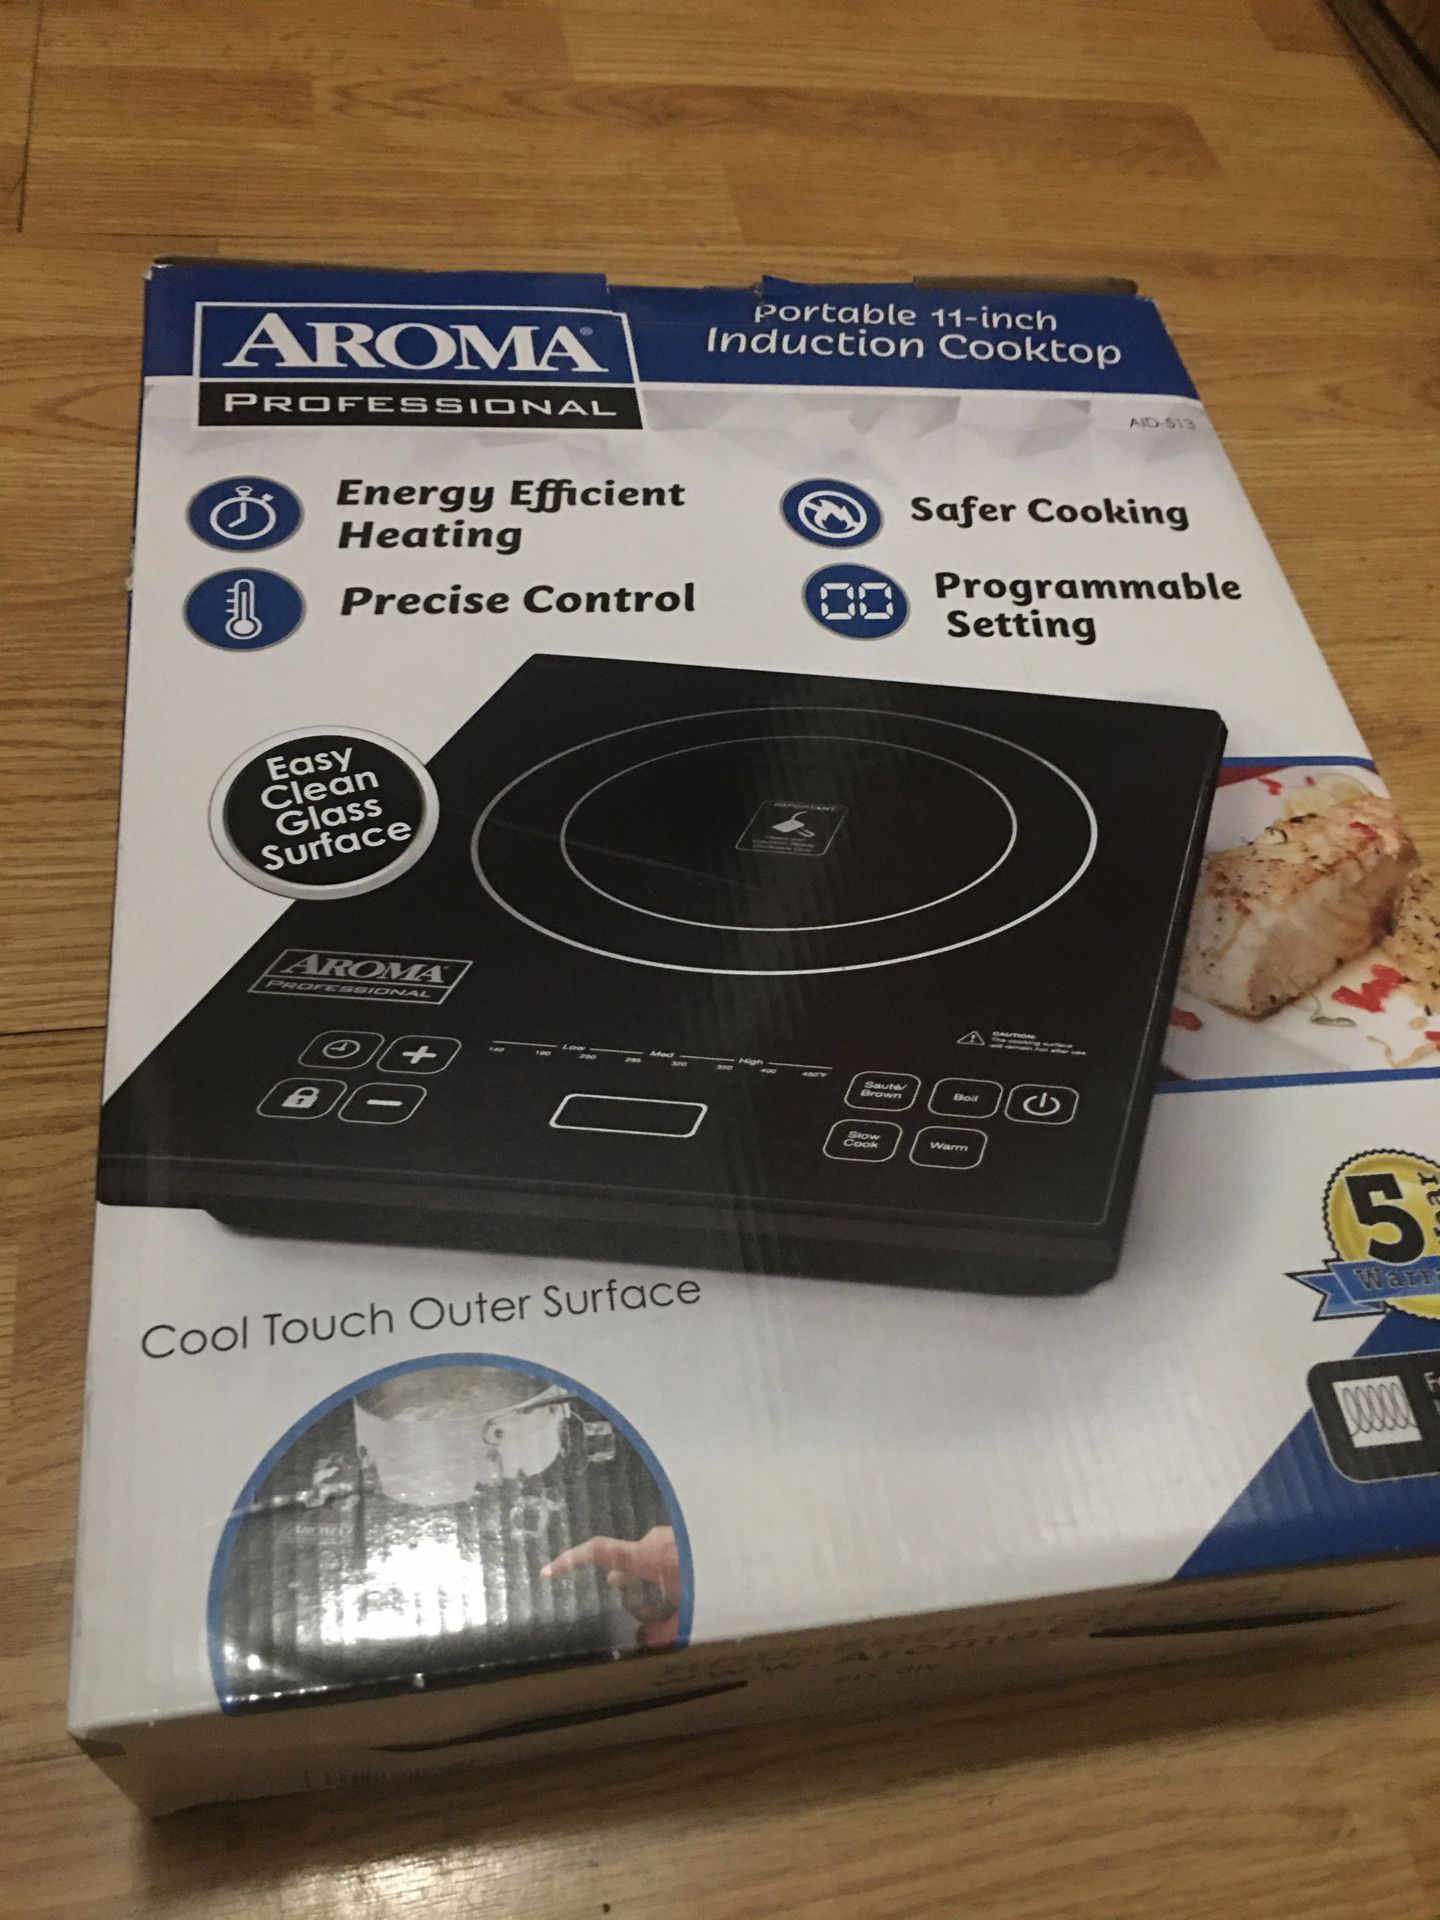 Aroma Portable Induction Cooktop